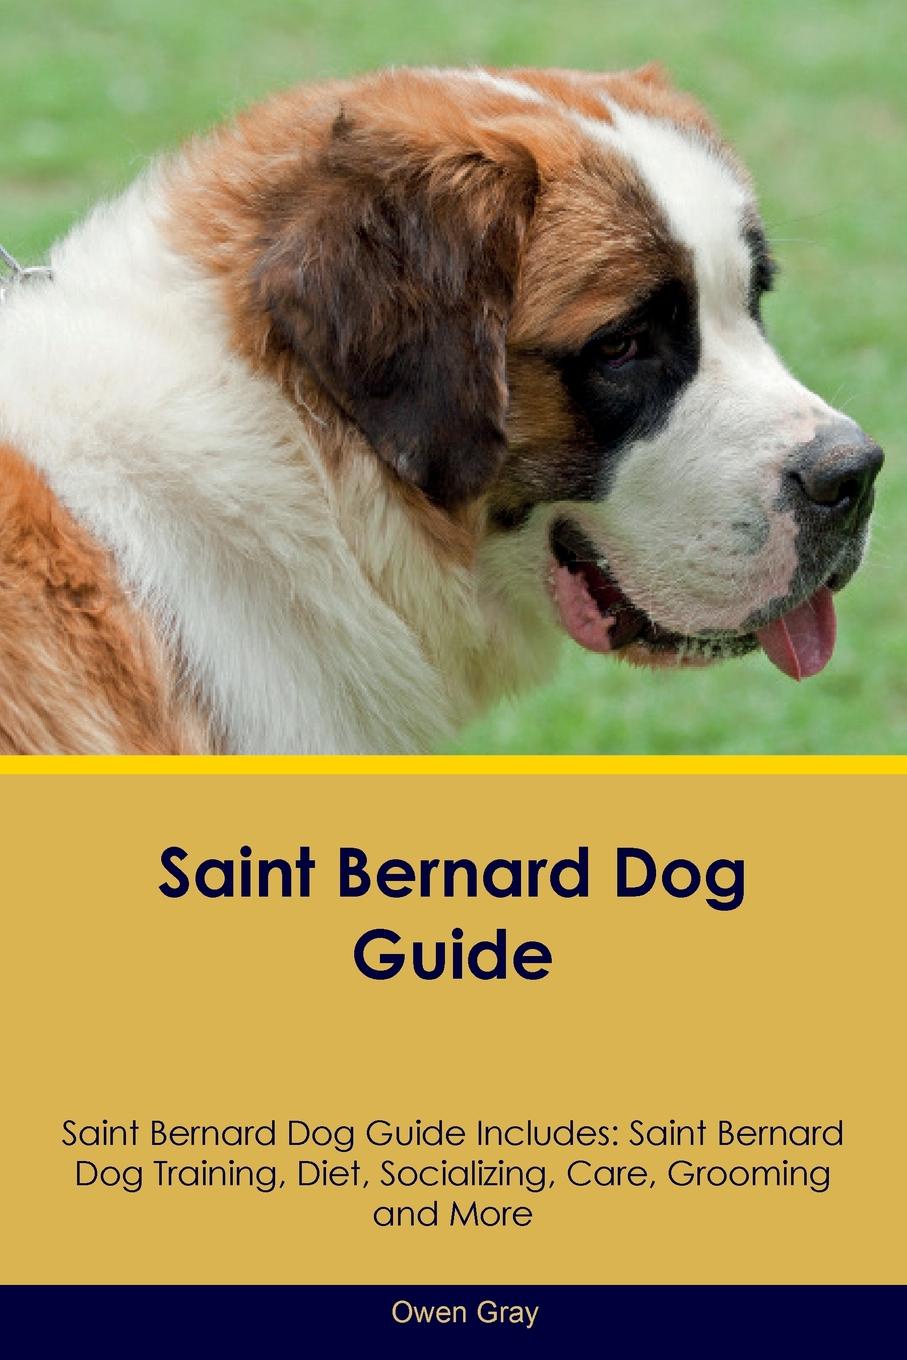 Saint Bernard Dog Guide Saint Bernard Dog Guide Includes. Saint Bernard Dog Training, Diet, Socializing, Care, Grooming, Breeding and More